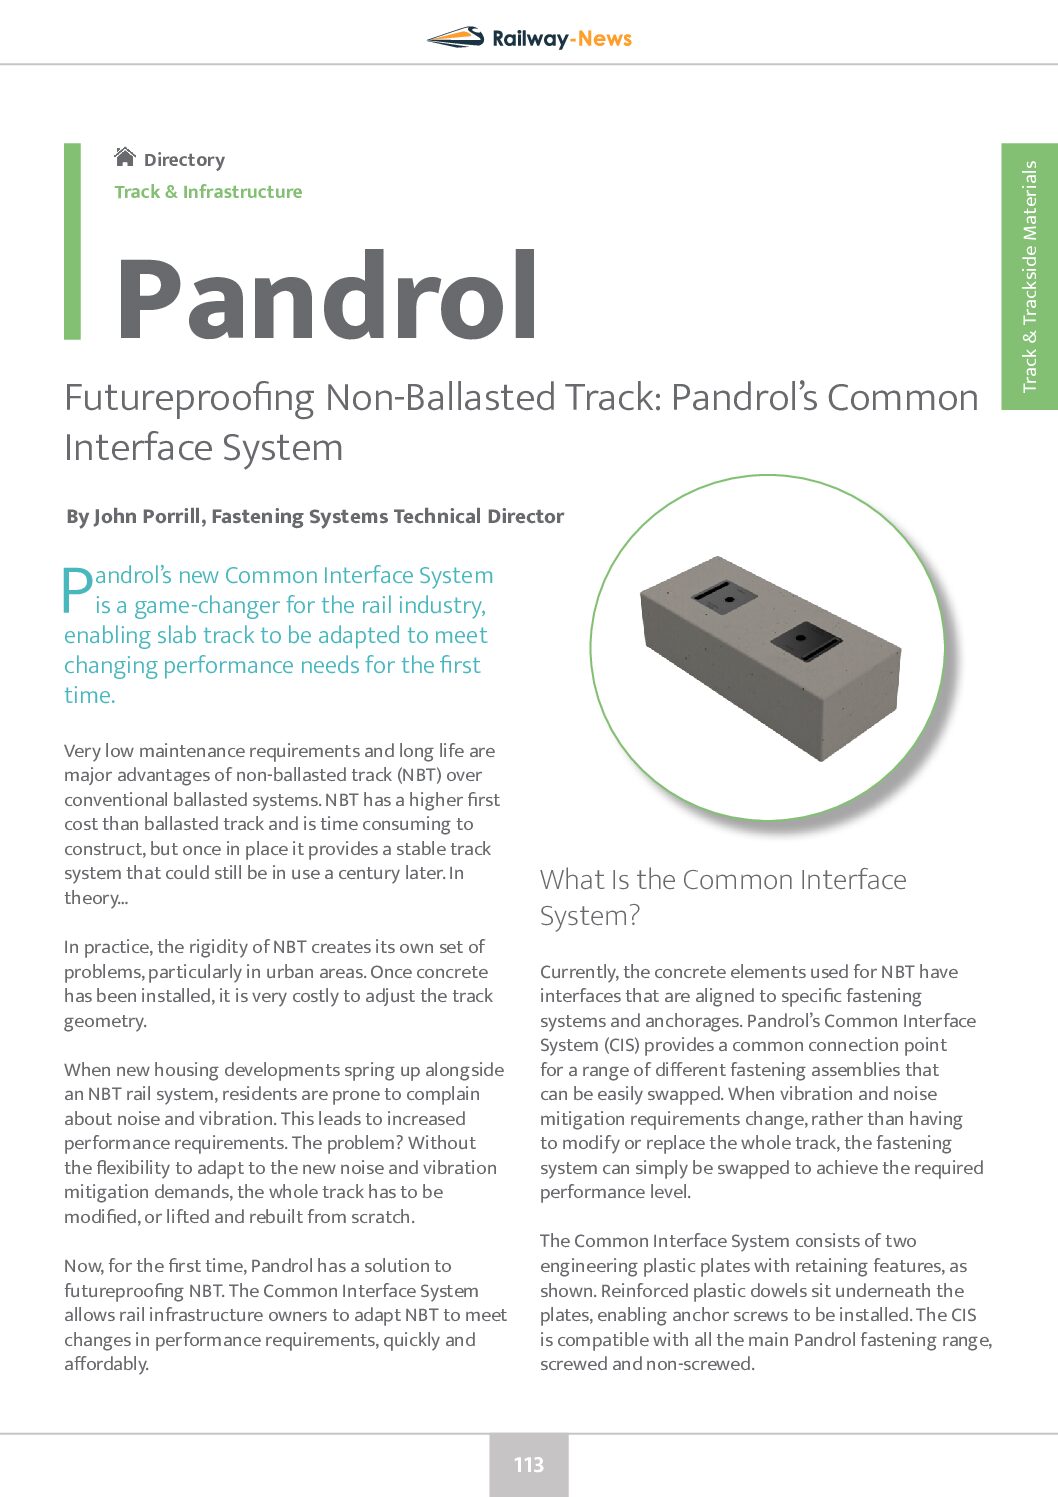 Futureproofing Non-Ballasted Track: Pandrol’s Common Interface System